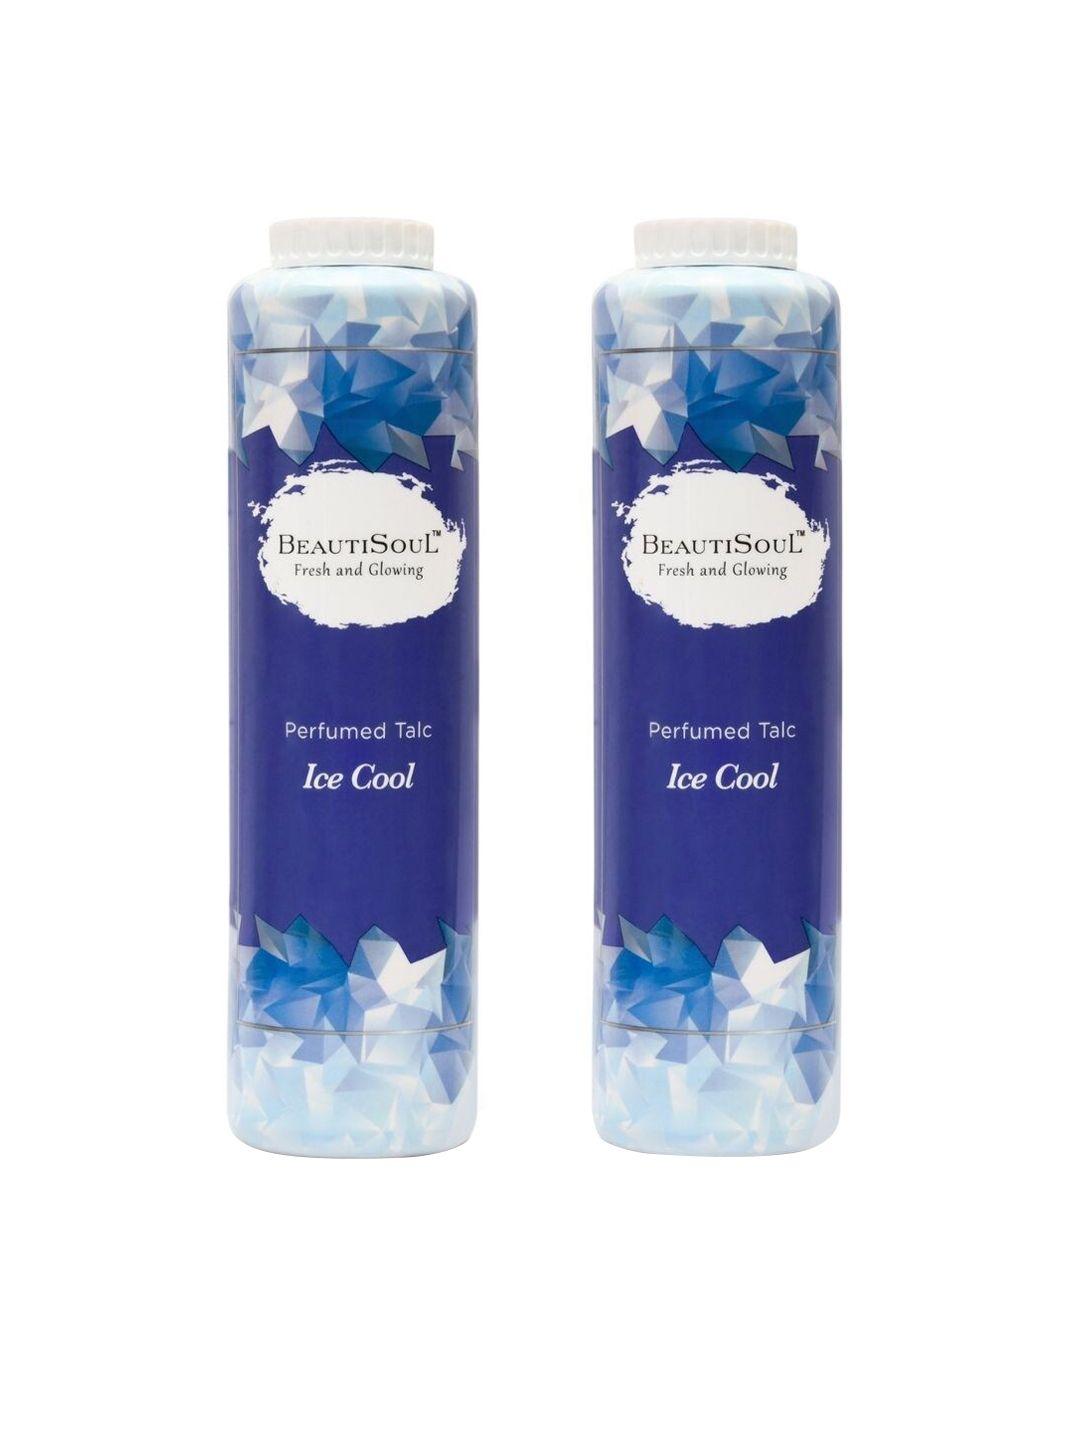 beautisoul set of 2 white ice cool perfumed talc 100g each